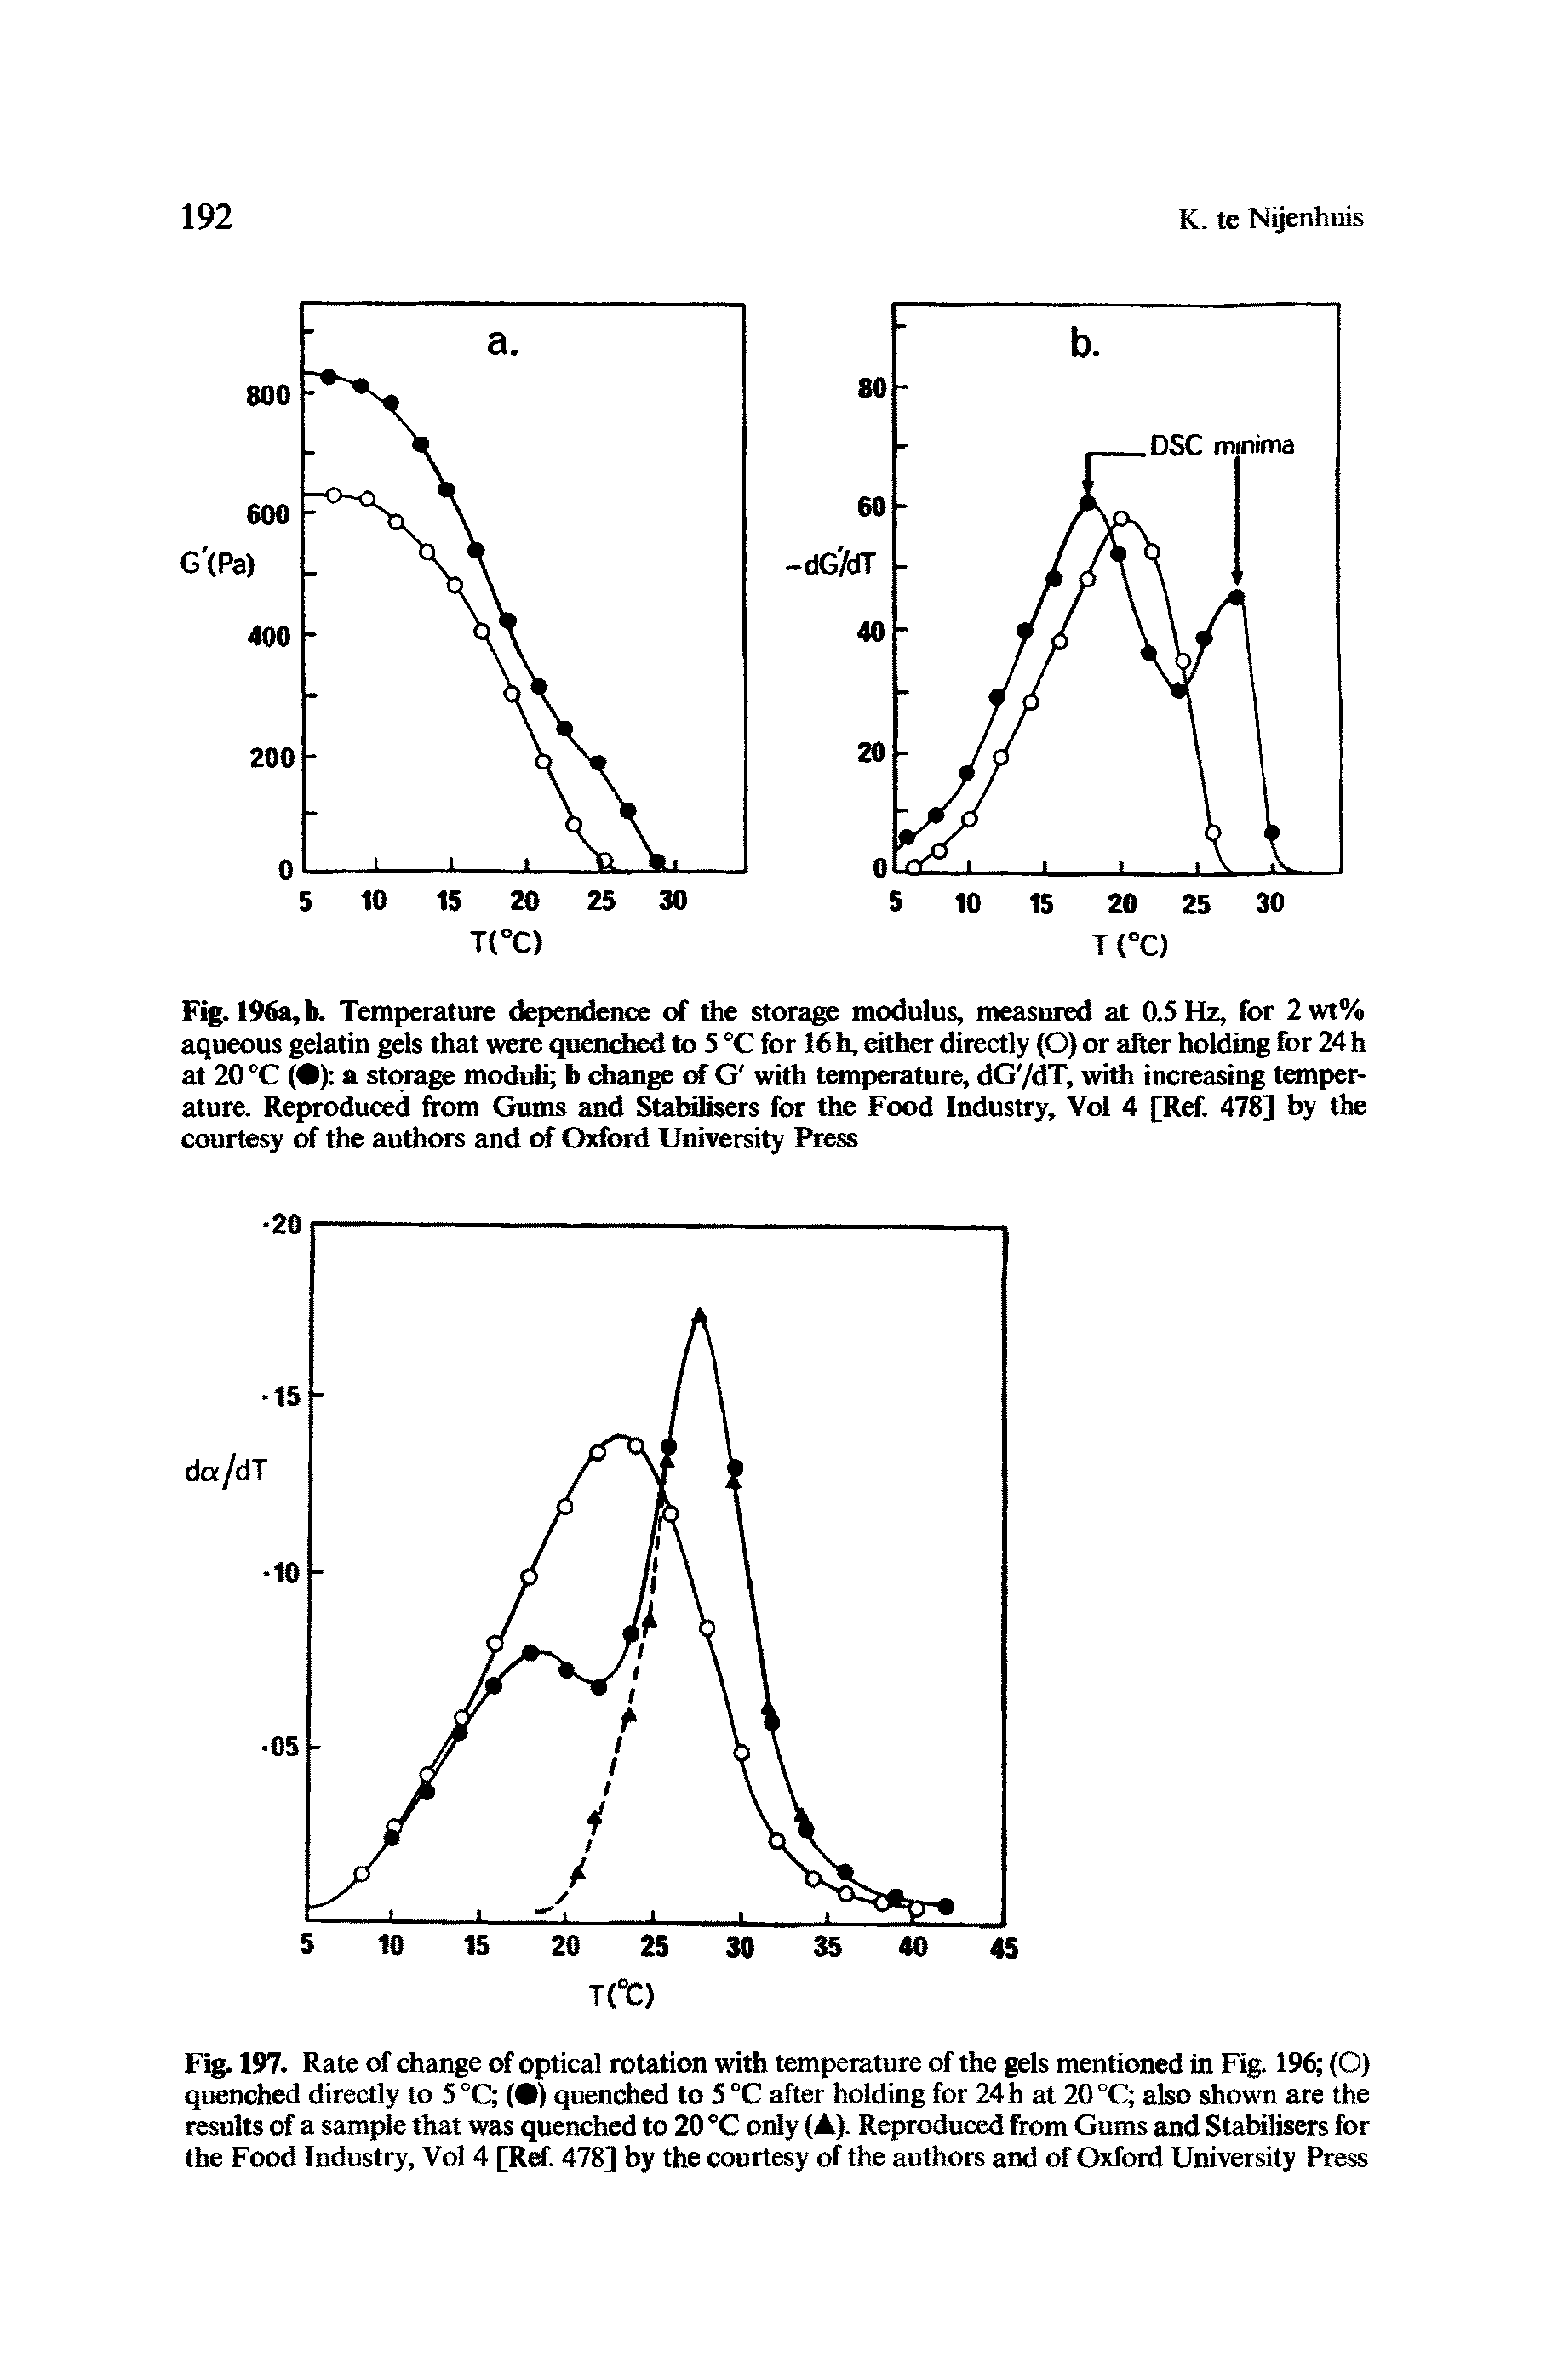 Fig. 197. Rate of change of optical rotation with temperature of the gels mentioned in Fig. 196 (O) quenched directly to 5 °C ( ) quenched to 5 °C after holding for 24 h at 20 °C also shown are the results of a sample that was quenched to 20 °C only (A). Reproduced from Gums and Stabilisers for the Food Industry, Vol 4 [Ref. 478] by the courtesy of the authors and of Oxford University Press...